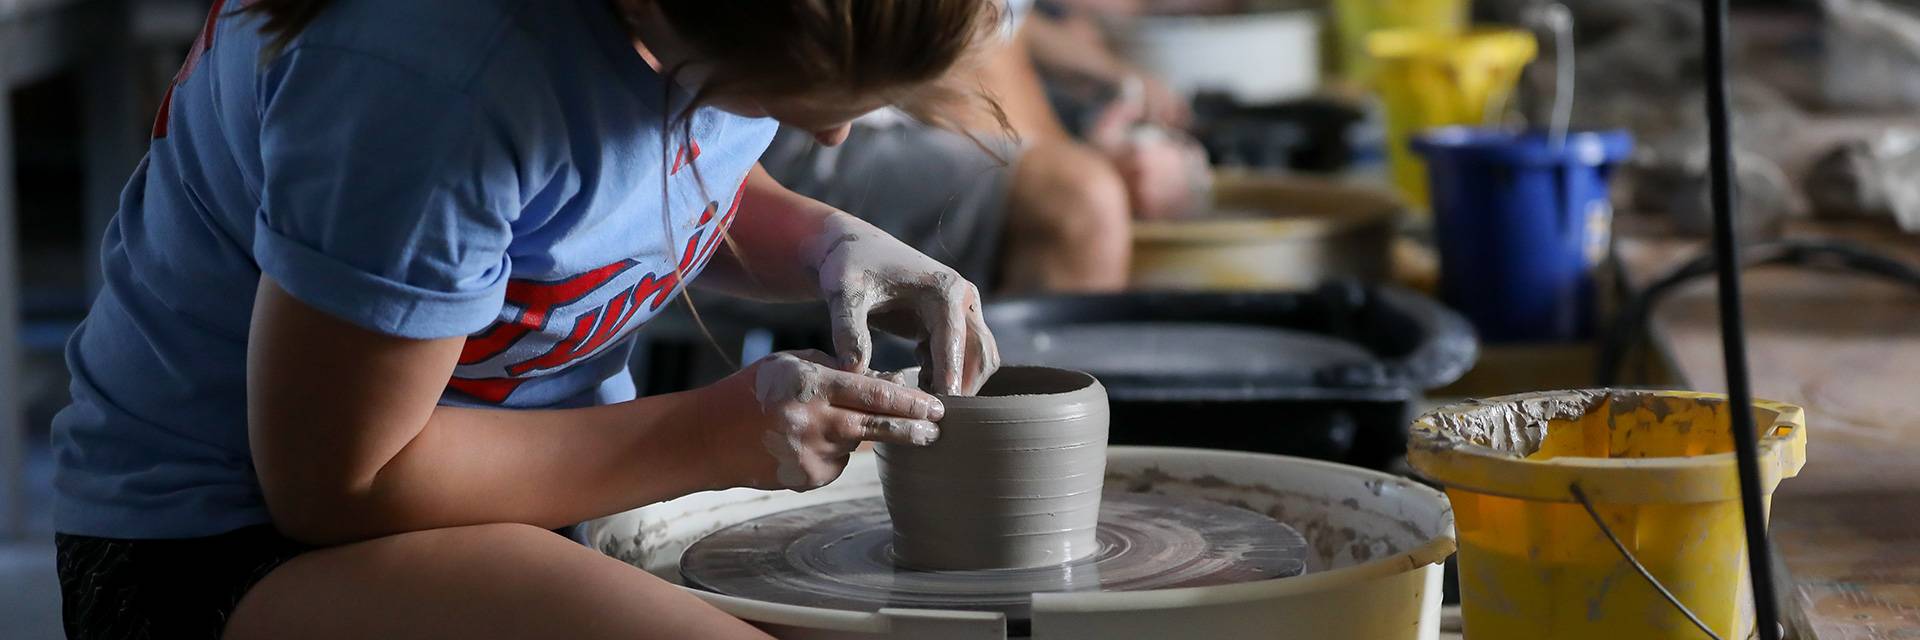 working on pottery in UND classroom